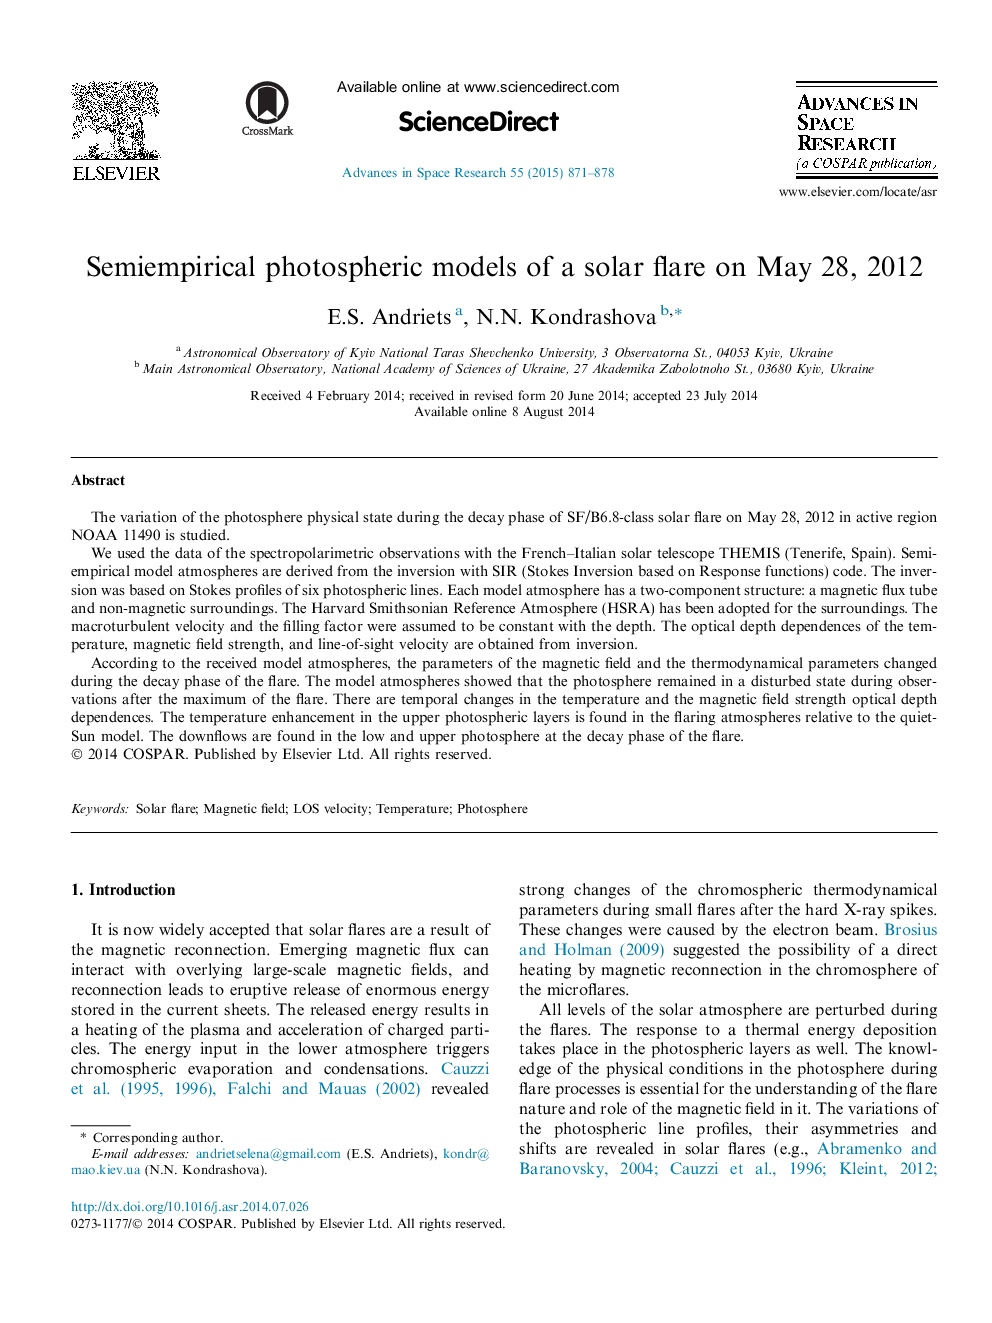 Semiempirical photospheric models of a solar flare on May 28, 2012